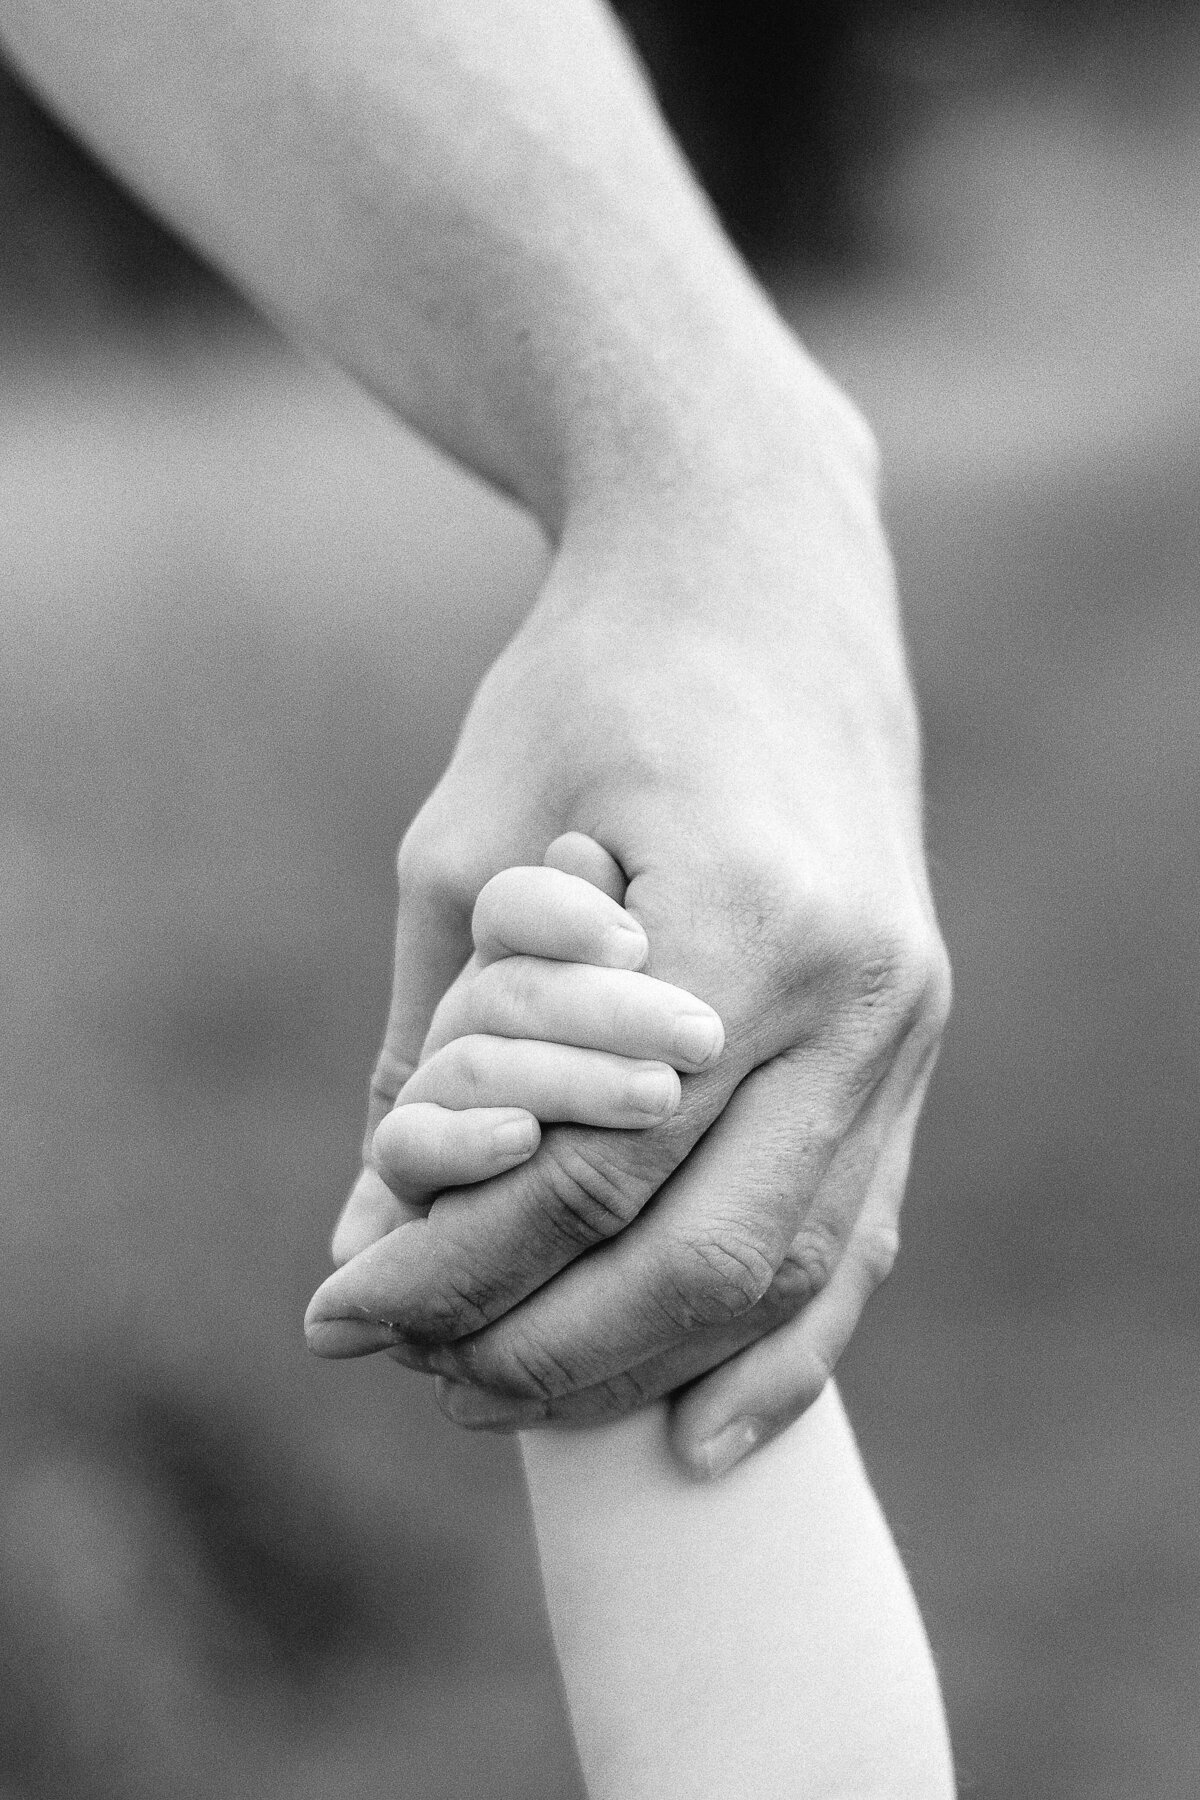 Artistic black and white photo of a parent holding their child's hand